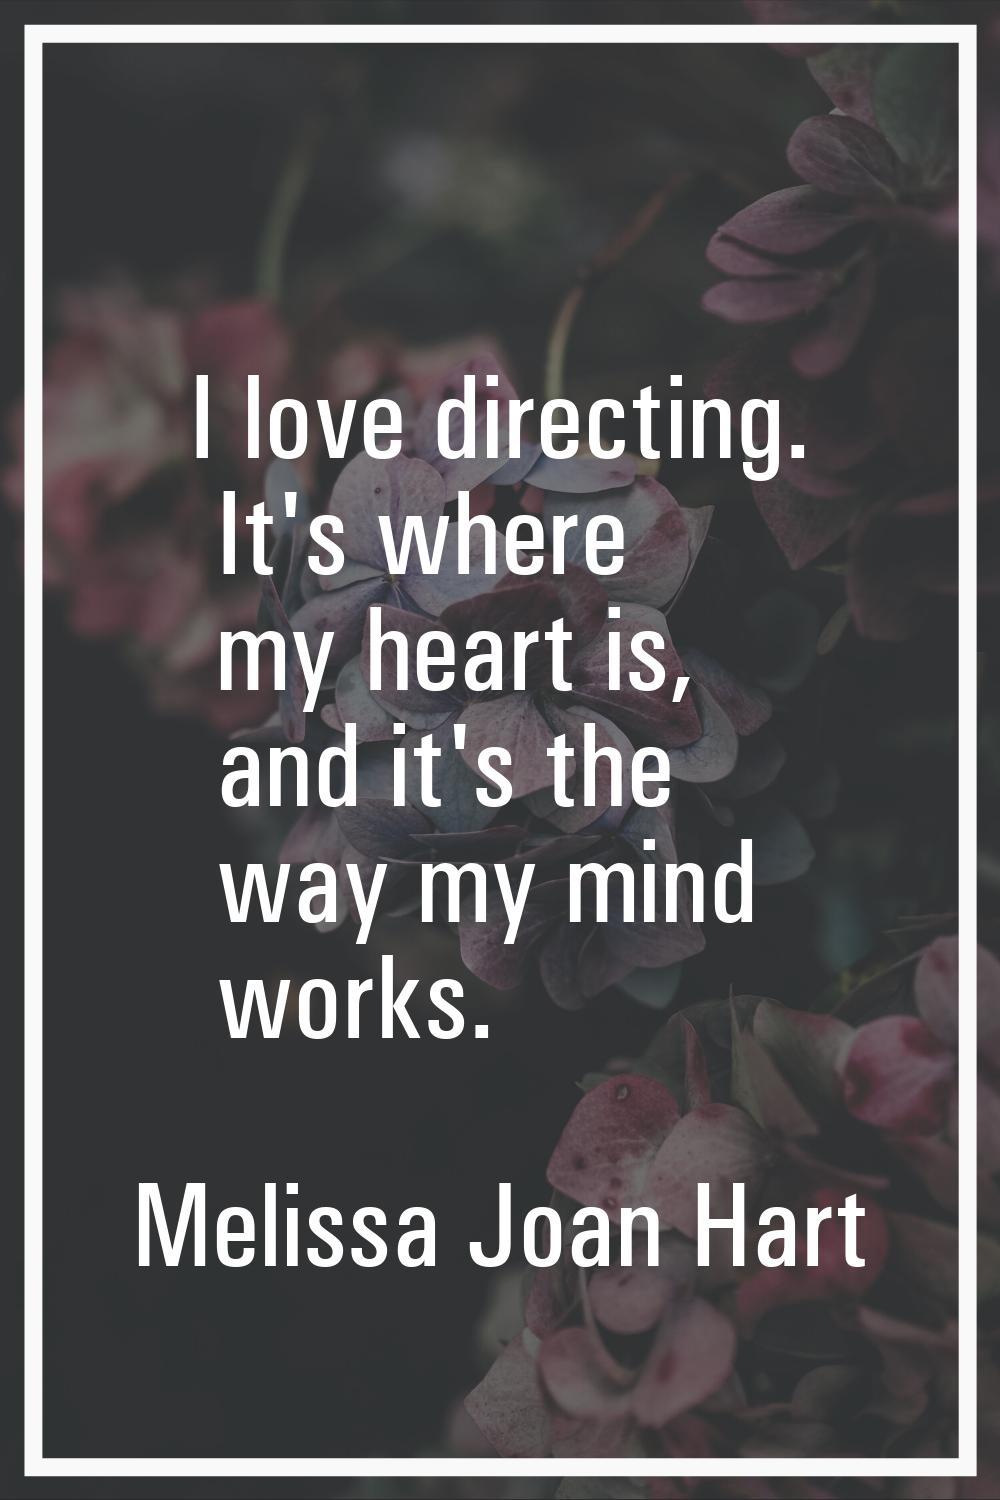 I love directing. It's where my heart is, and it's the way my mind works.